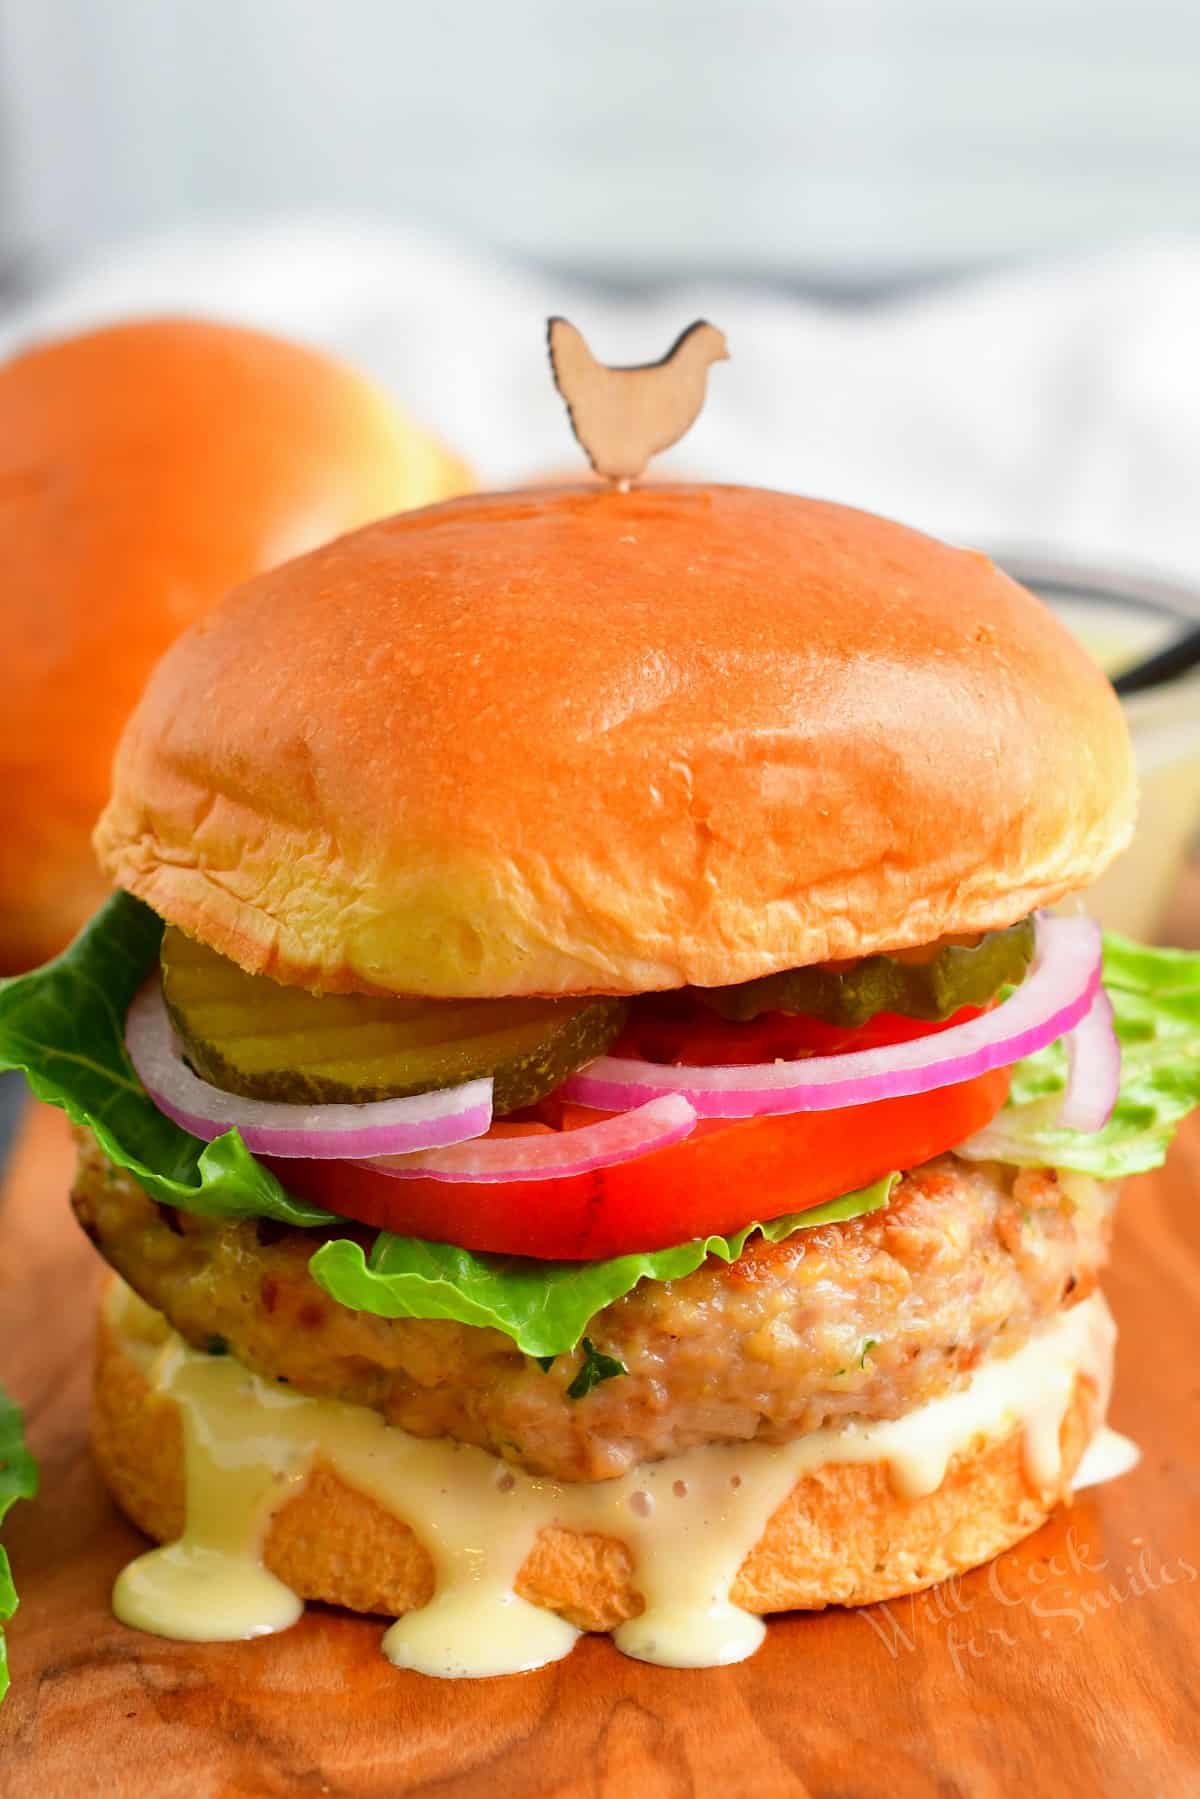 Juicy chicken burger on Brioche bun with creamy sauce dripping and vegetable toppings.